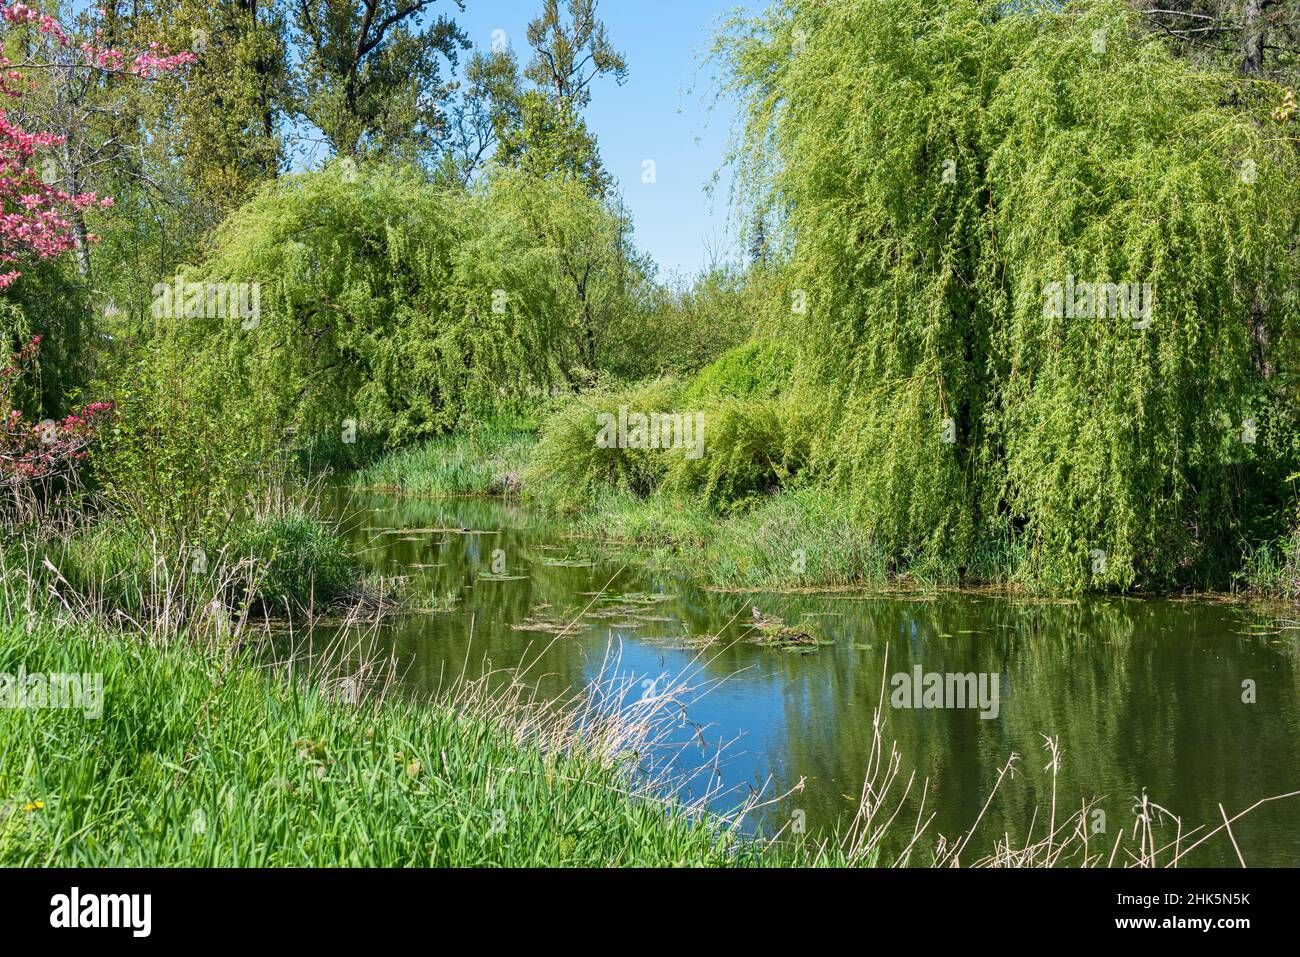 Green trees and grass around slow river on bright hot summer day Stock Photo